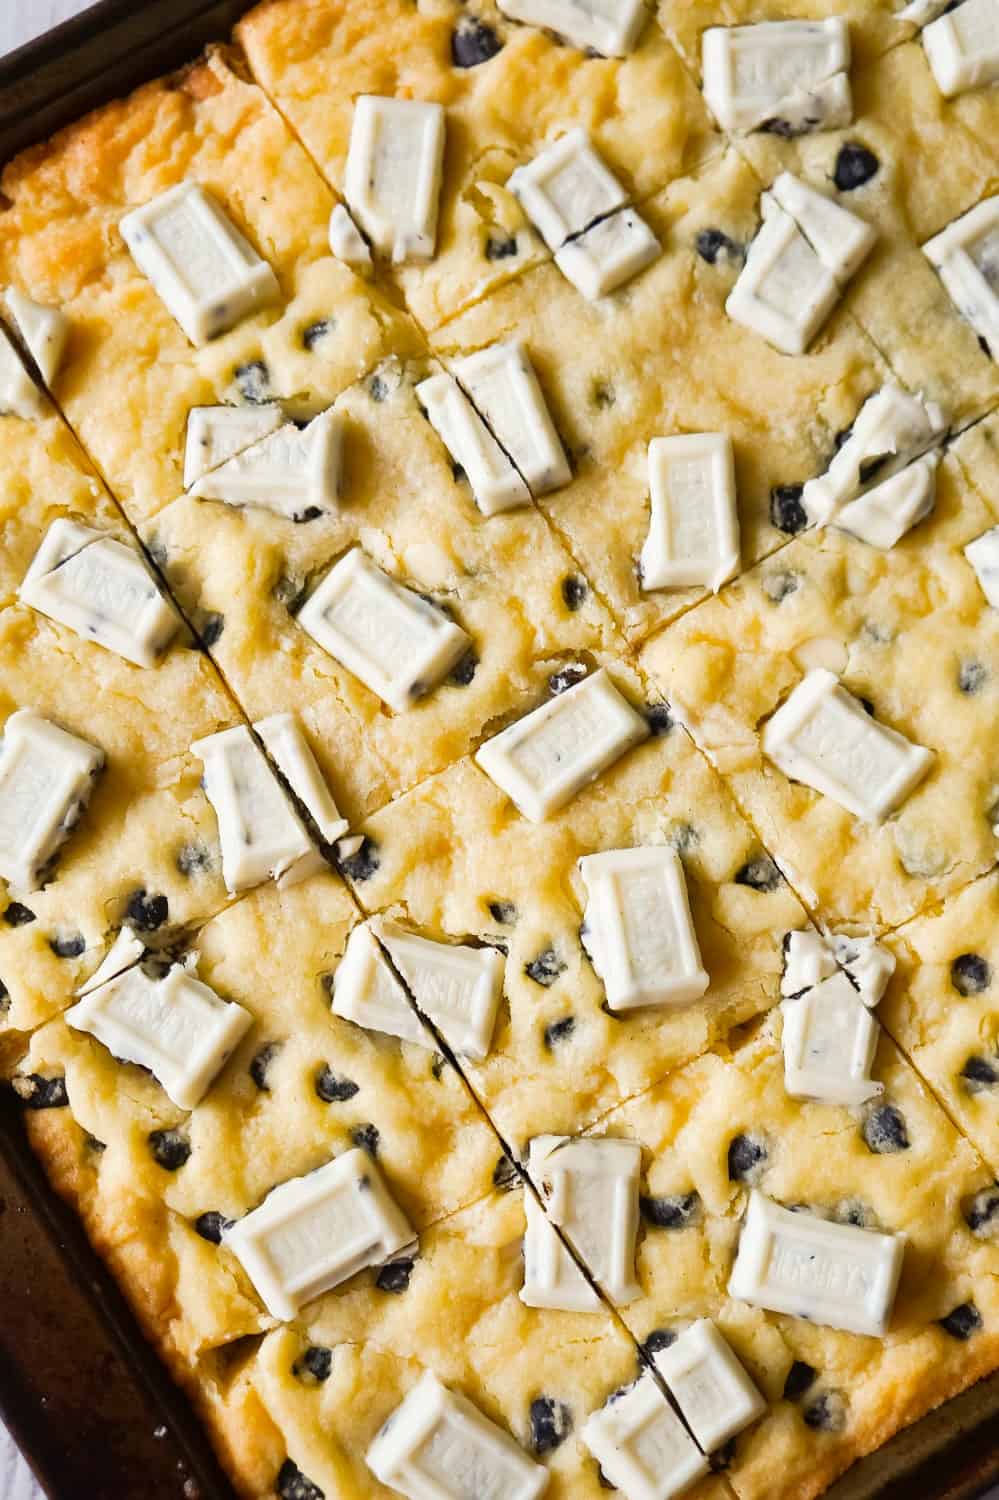 Cookies and Cream Sugar Cookie Bars are chewy sugar cookies made with vanilla pudding mix and loaded with Hershey's Cookies 'n' Creme baking bits and snack size Hershey's Cookies 'n' Creme bars.